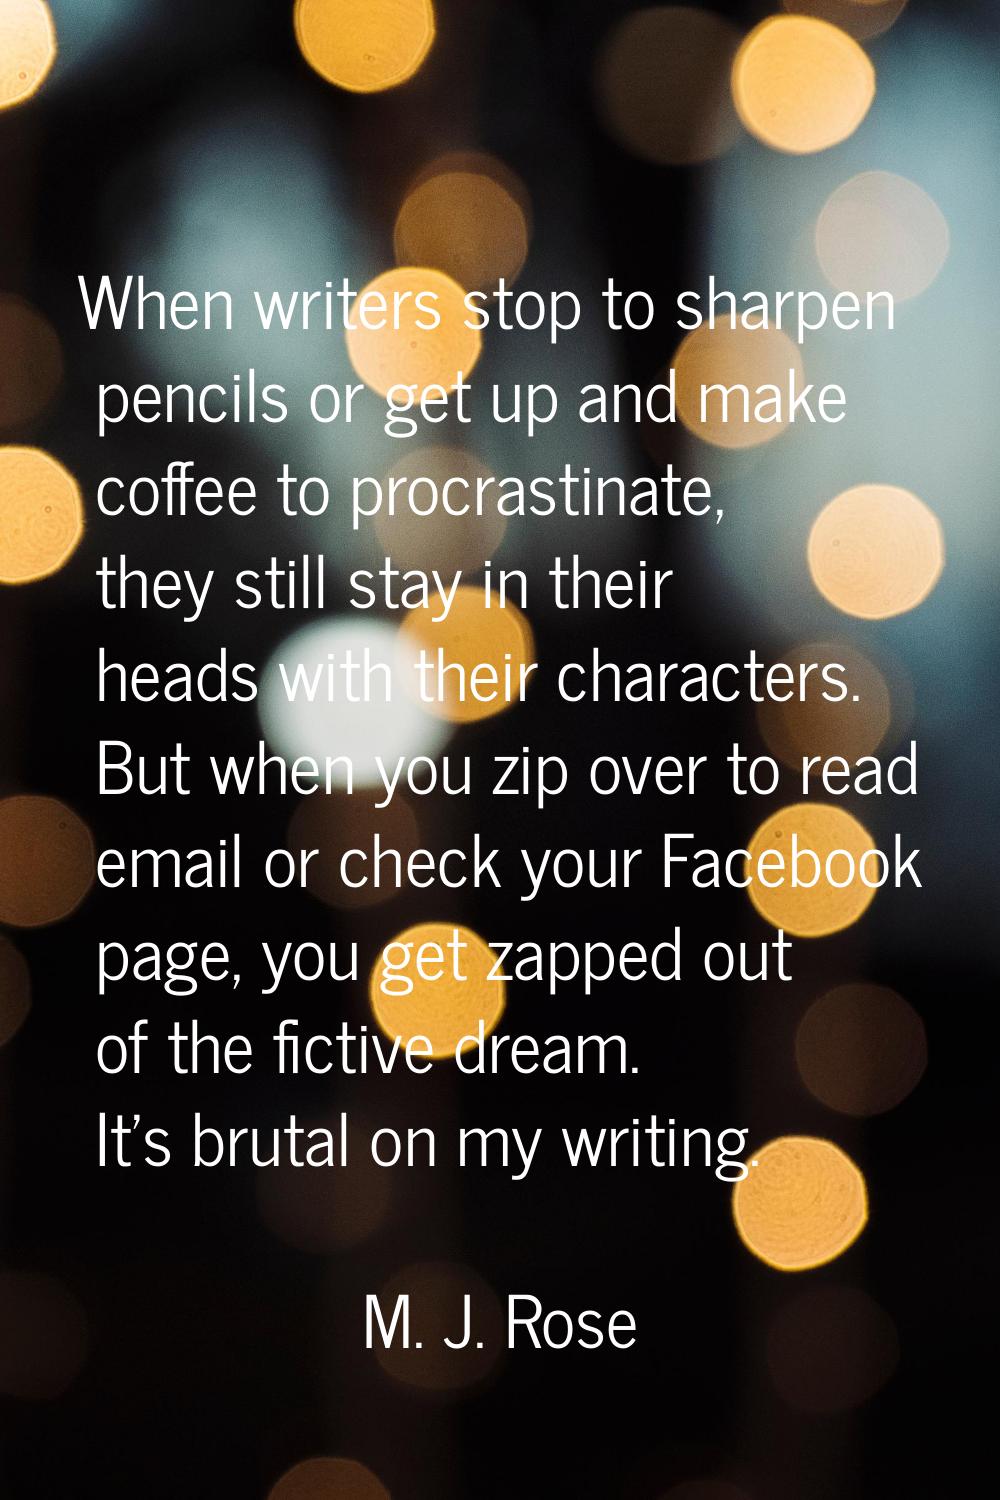 When writers stop to sharpen pencils or get up and make coffee to procrastinate, they still stay in